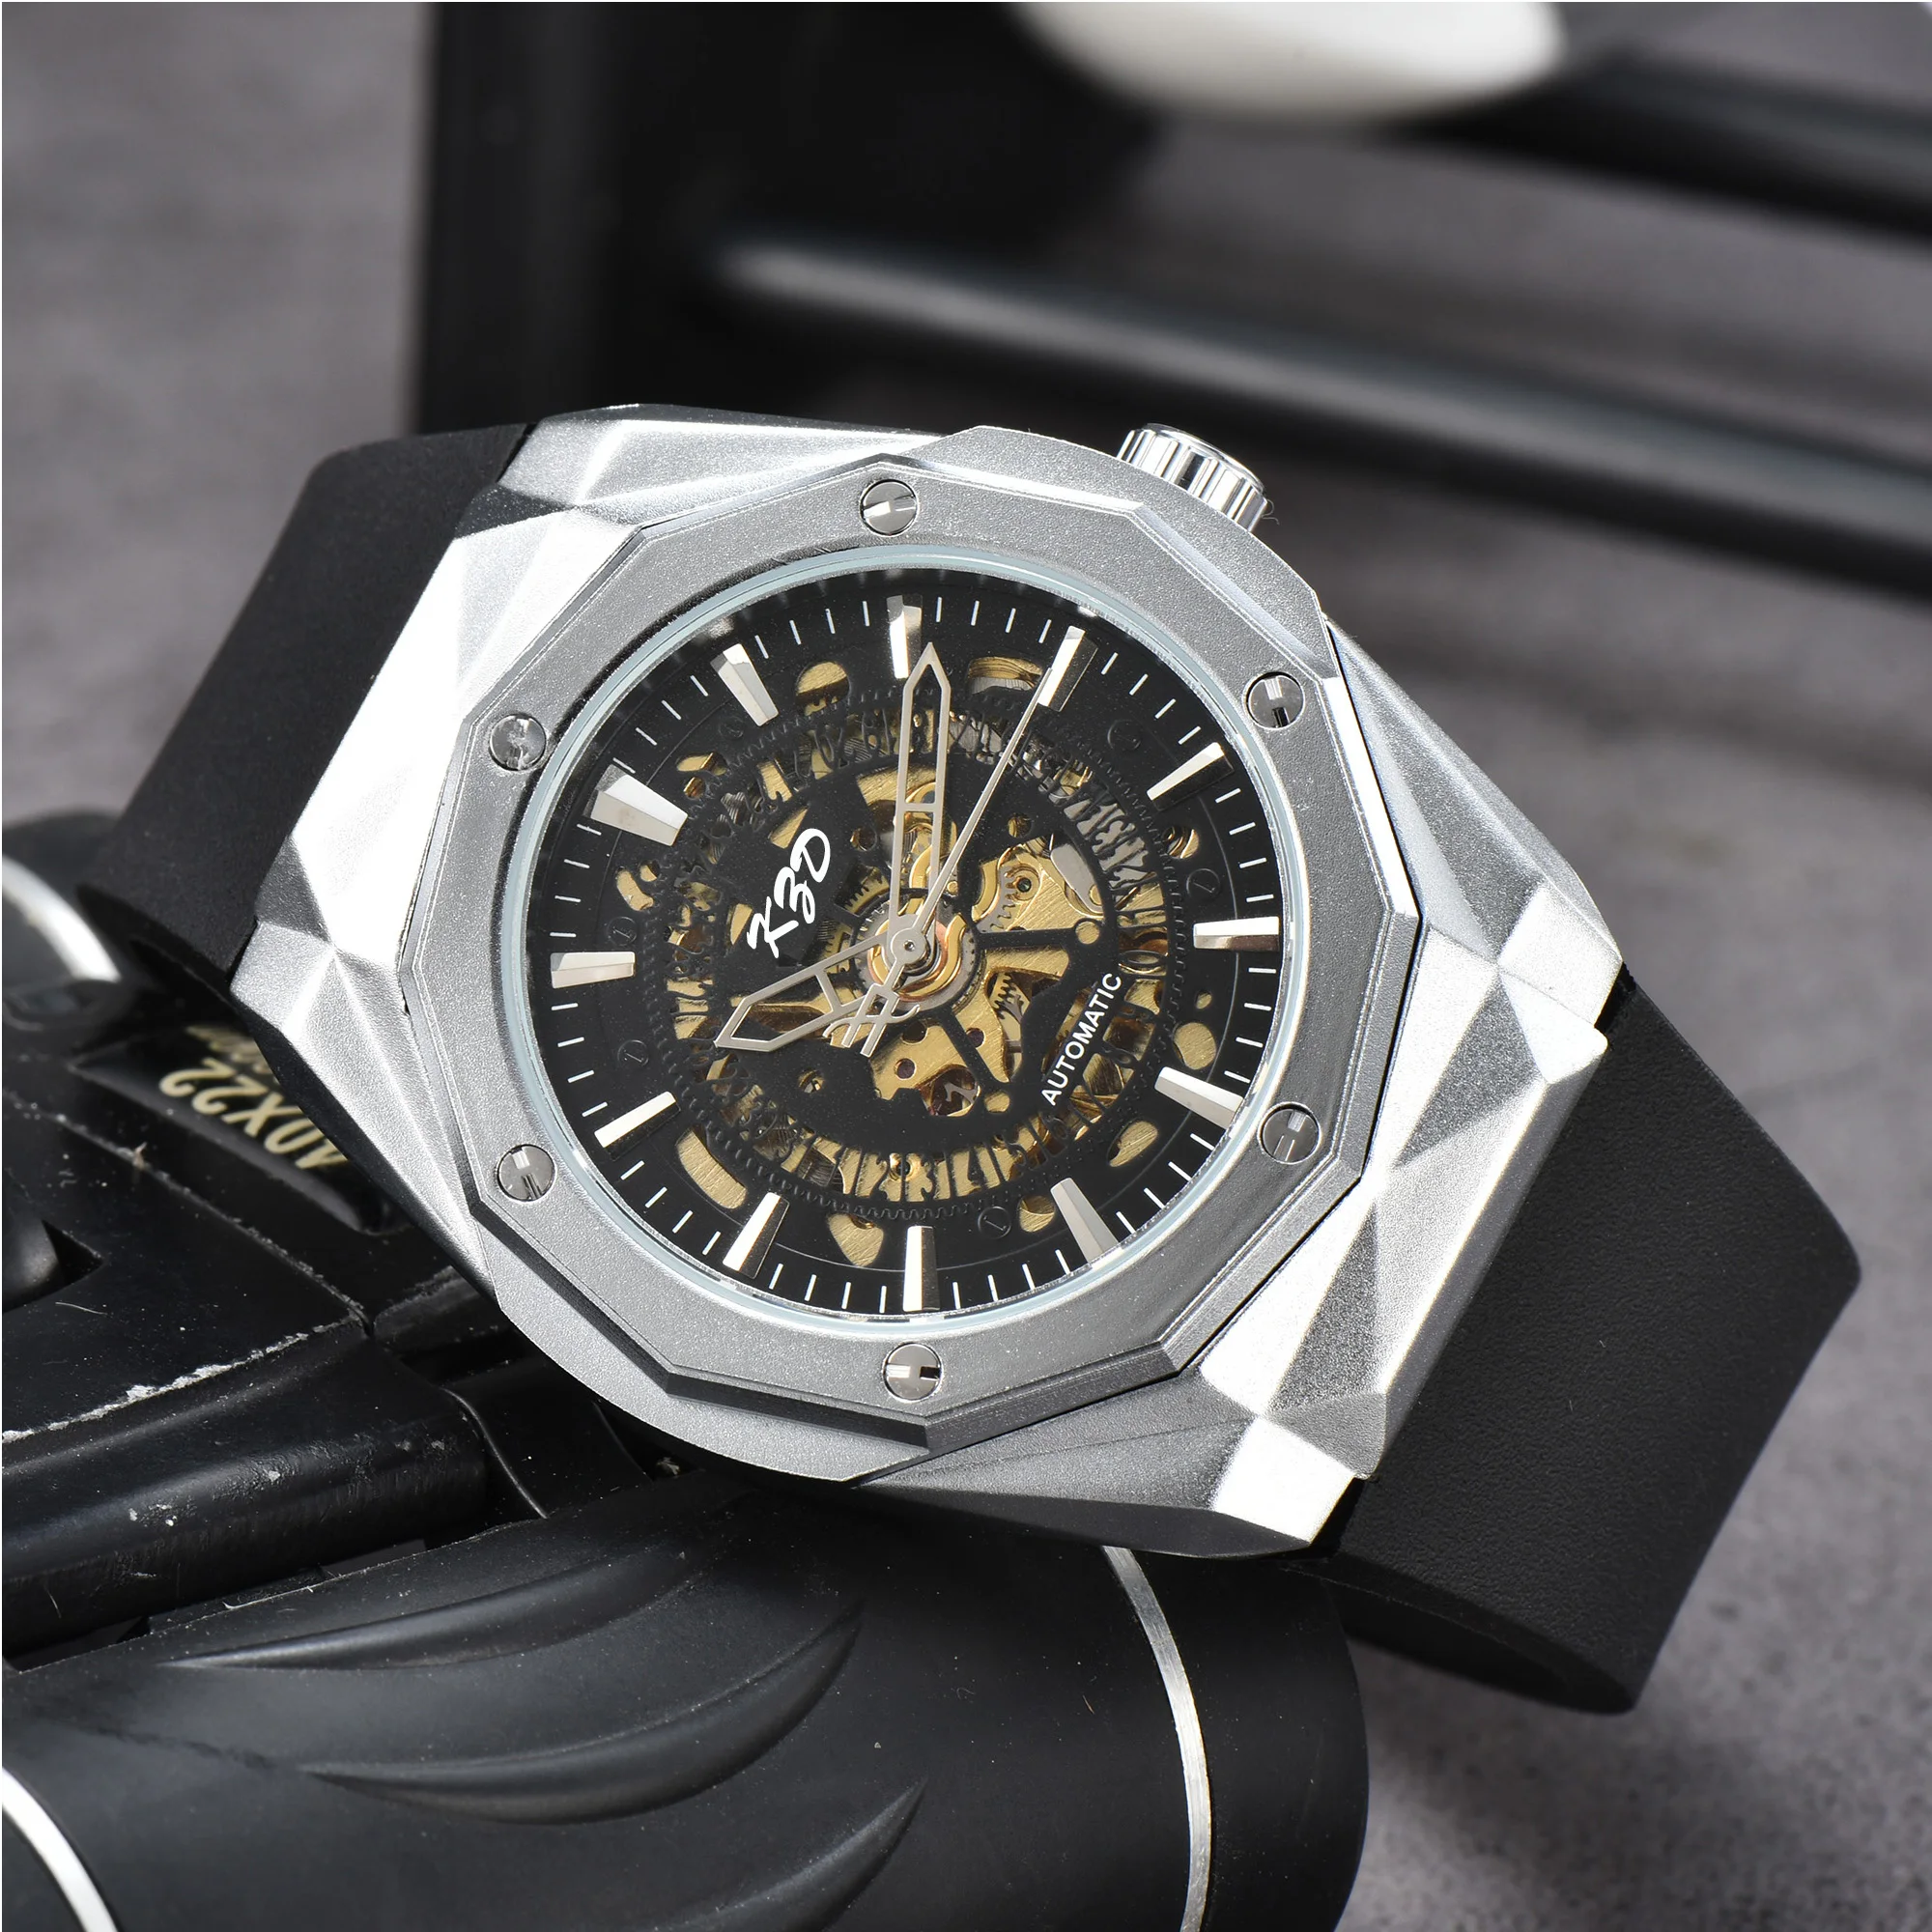 

Luxury Mechanical Original Brand Watches For Men Big Bang Fashion Automatic Date High Quality Chronograph Wrist Watch AAA Clock